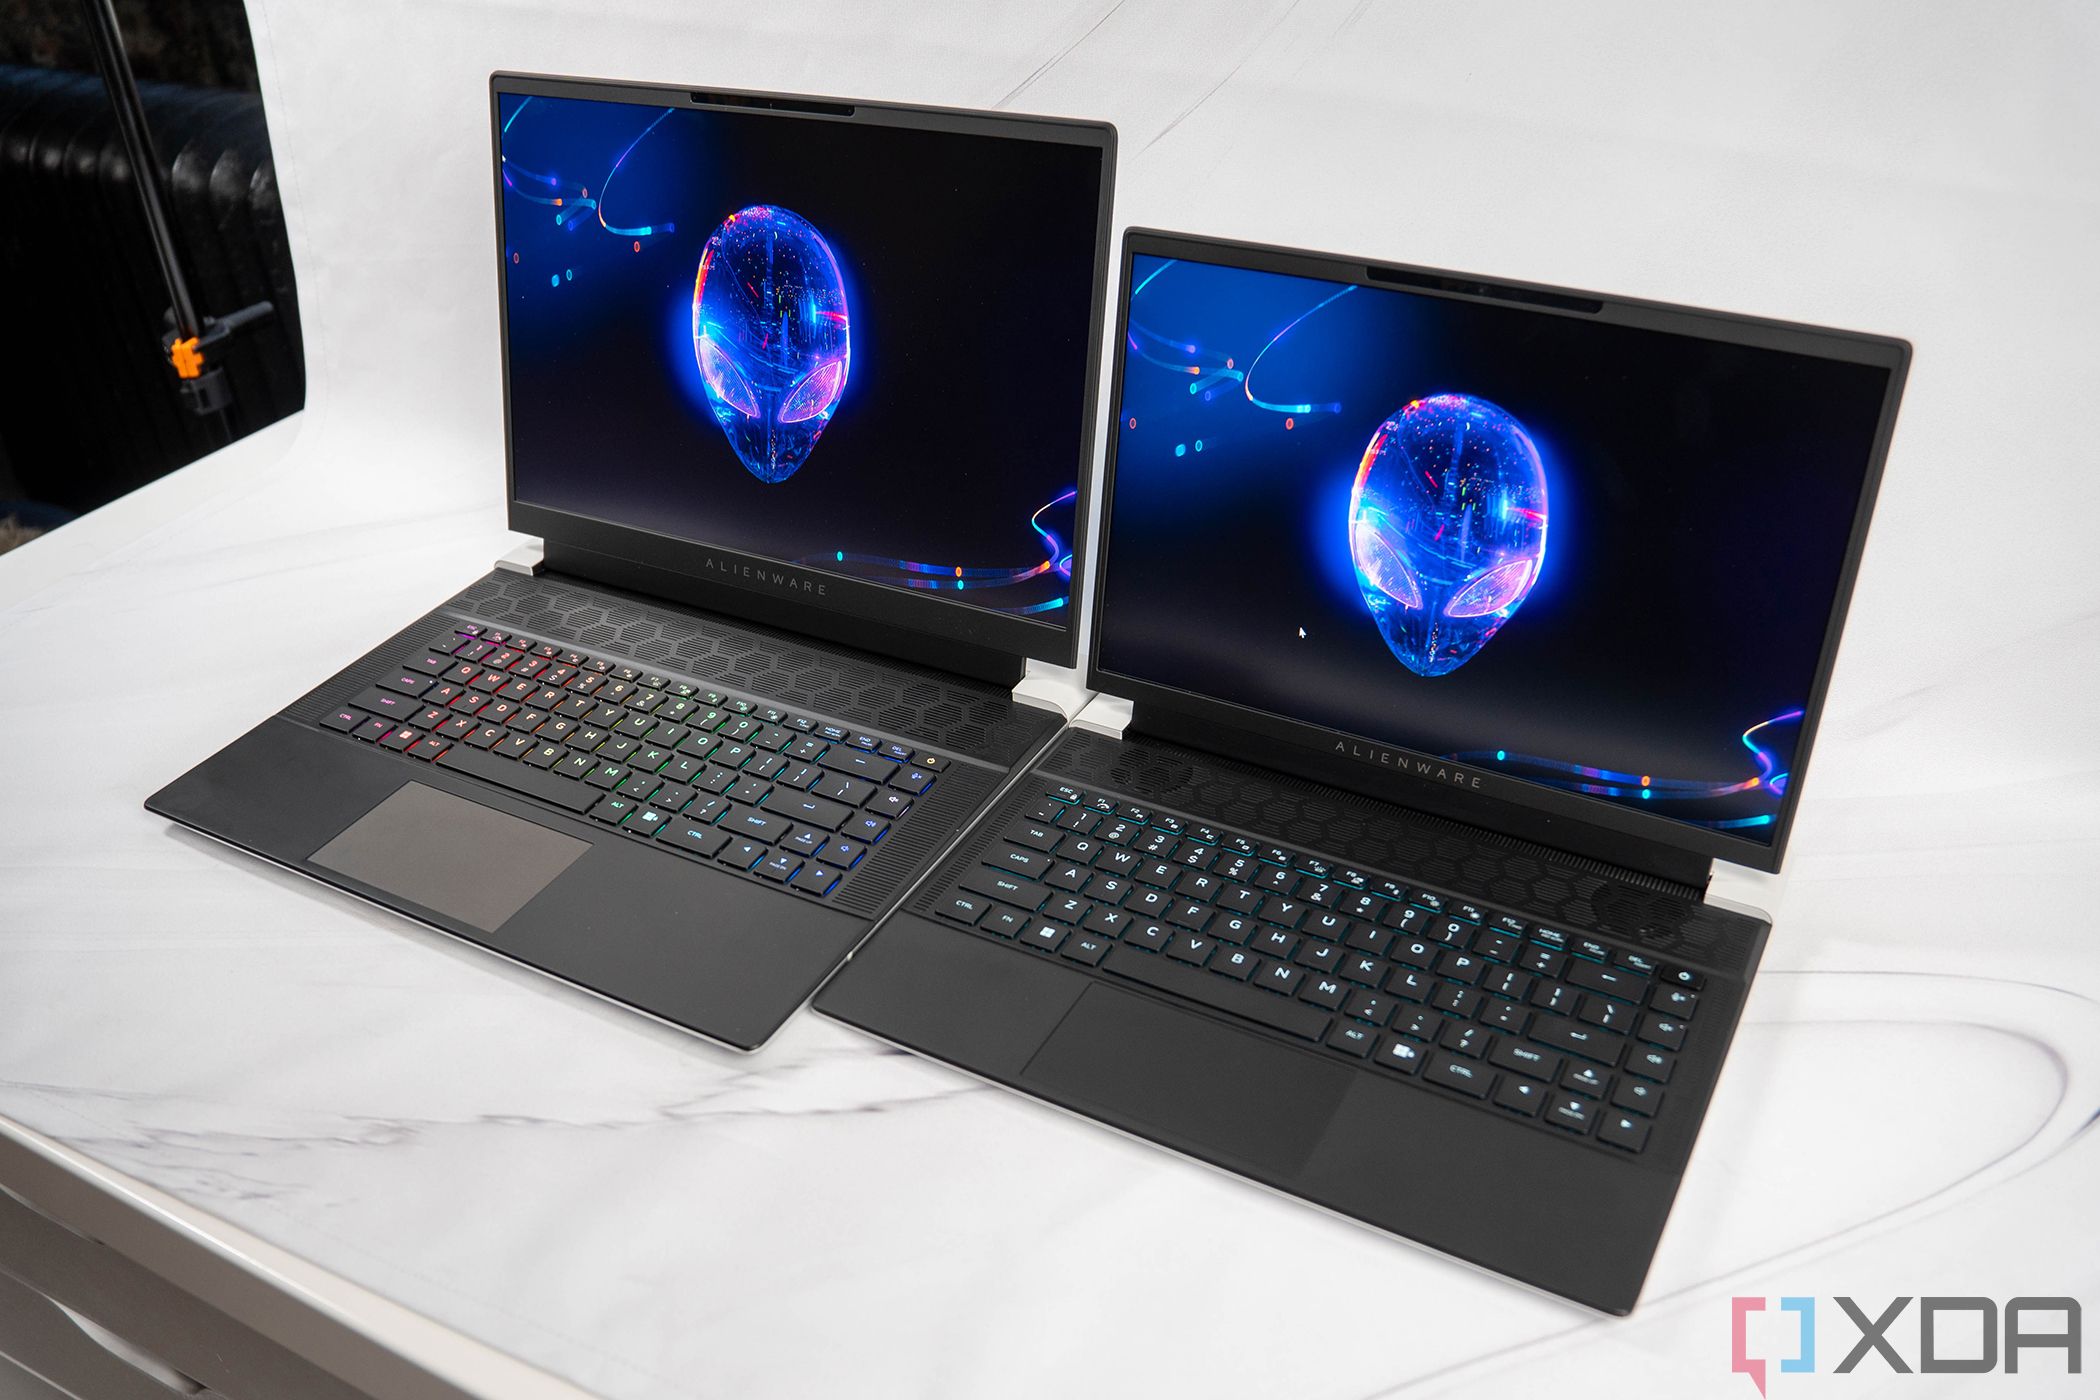 Alienware goes bigger on gaming with the m18, a new 18inch gaming laptop